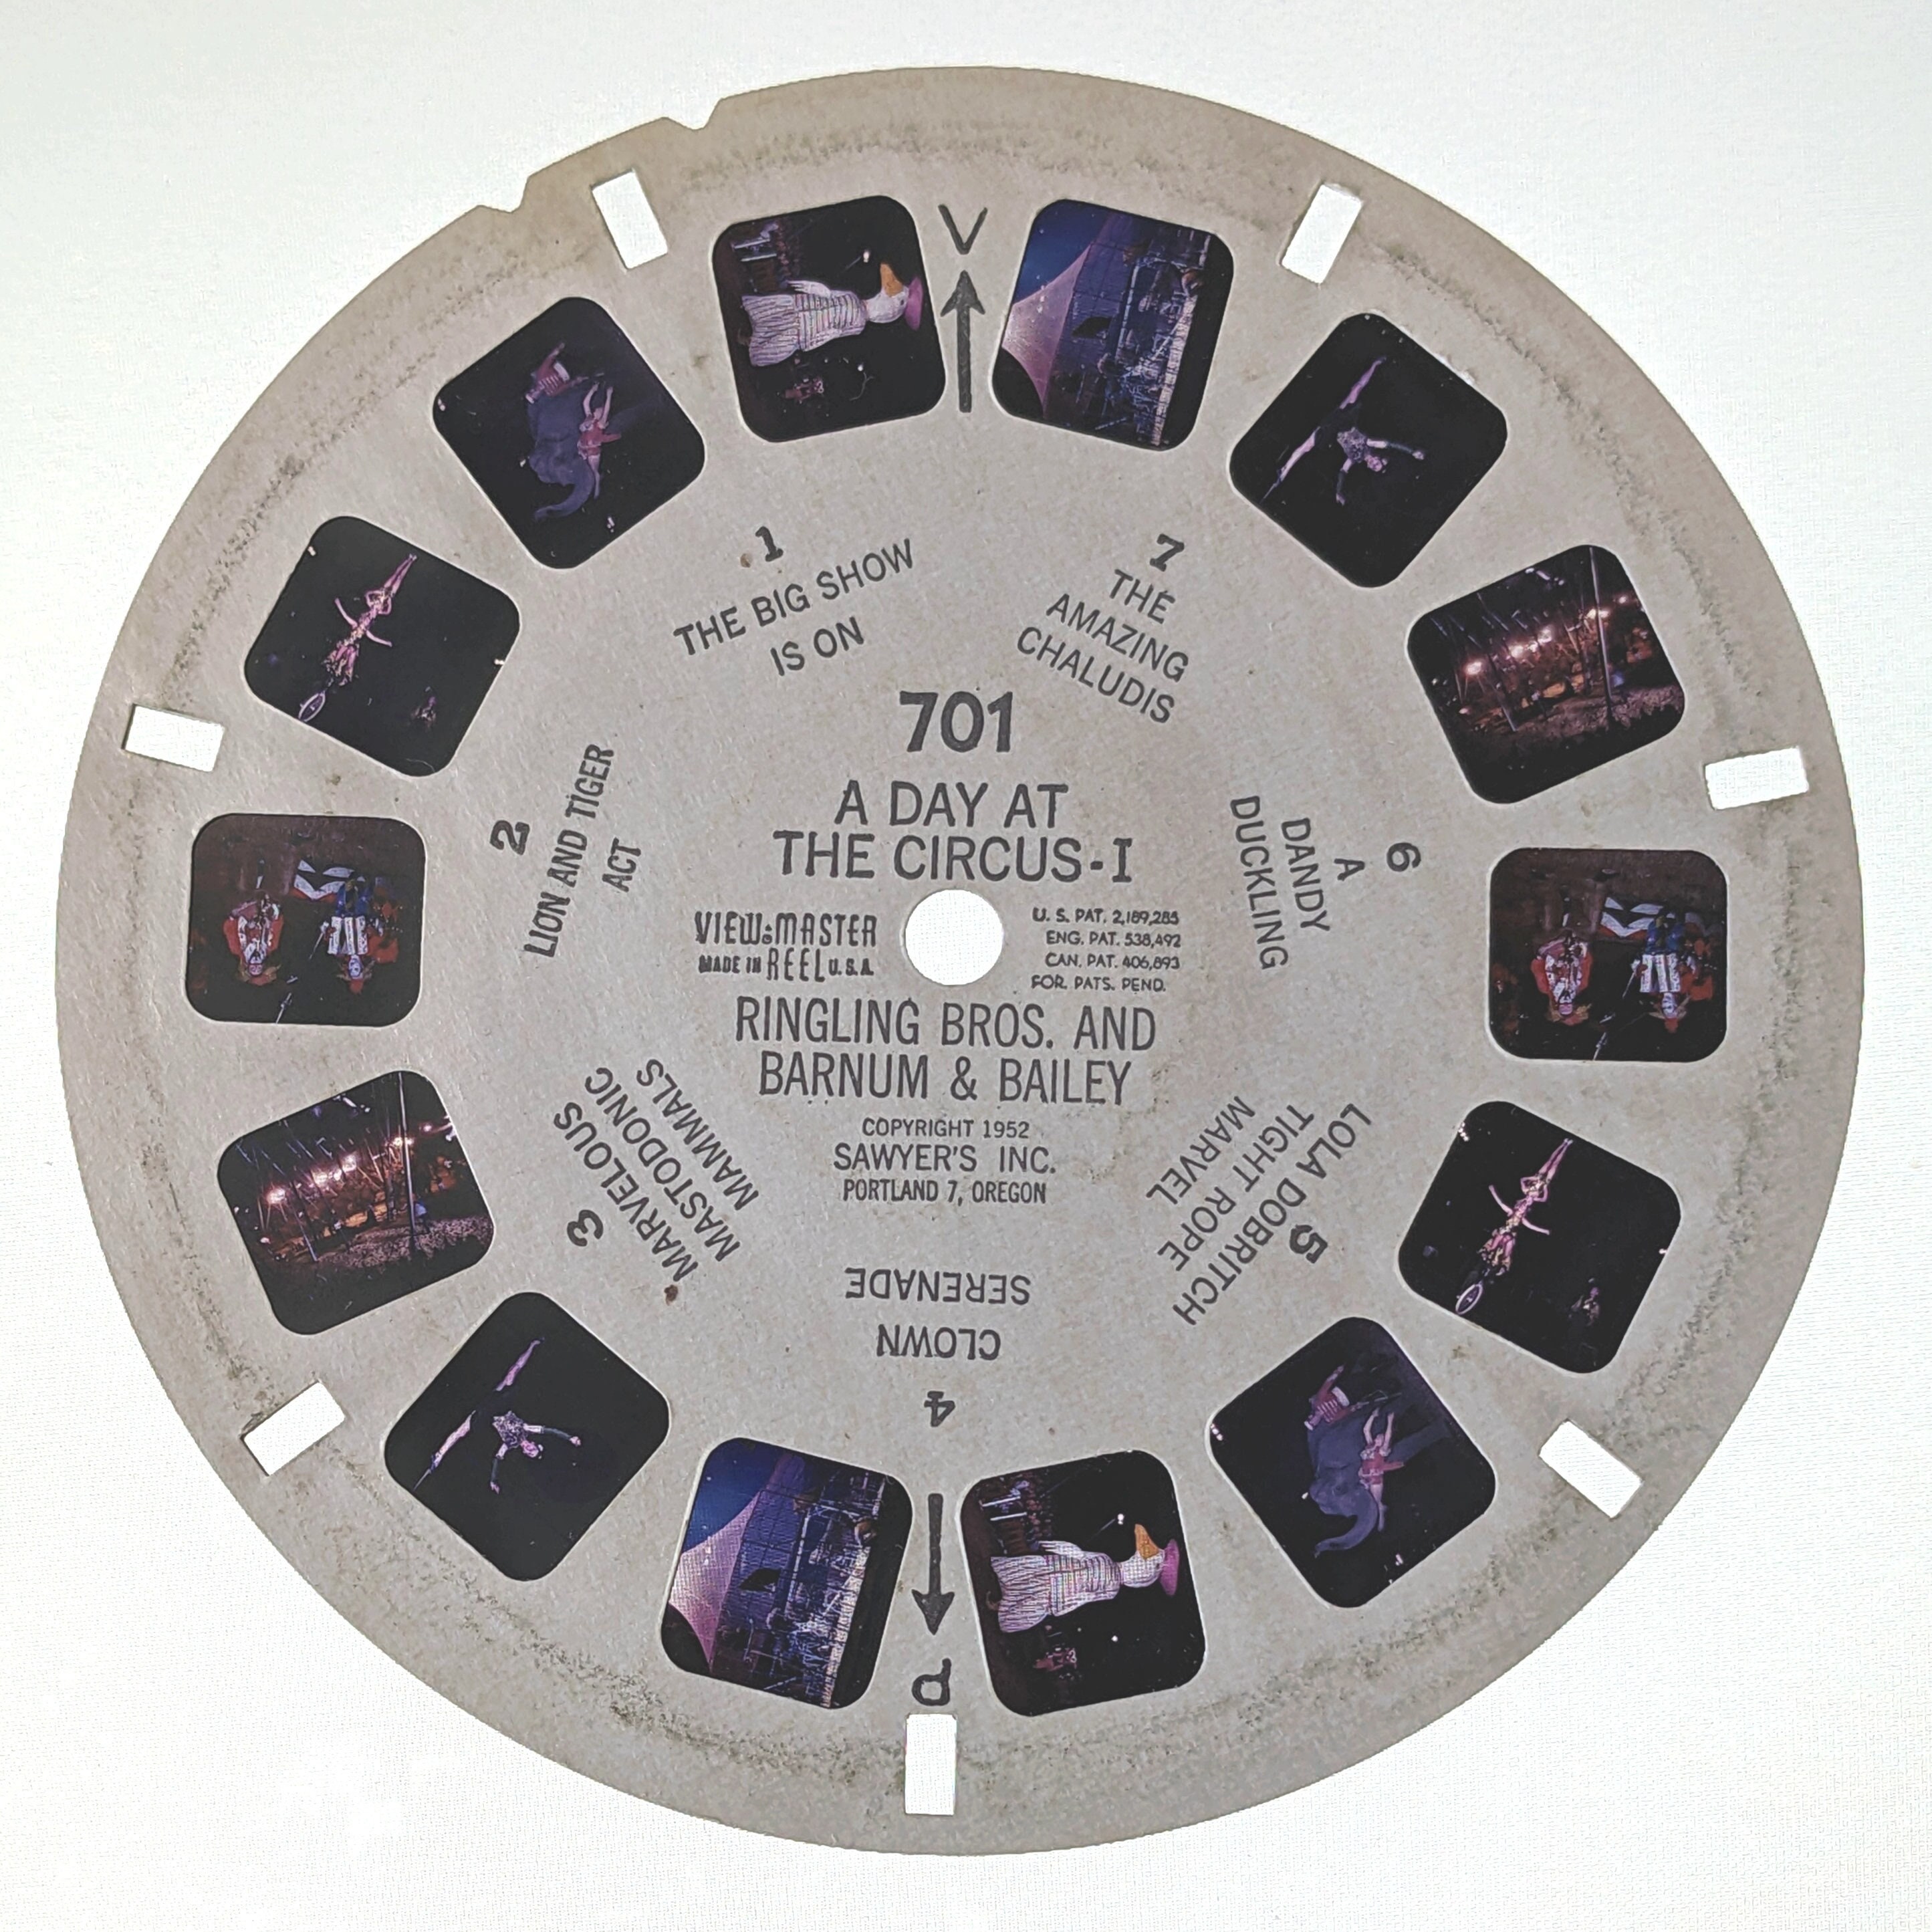 A DAY at the CIRCUS, Ringling Bros. and Barnum & Bailey Circus Viewmaster  REEL 701, 1952 Sawyer's View-master Single Reel 